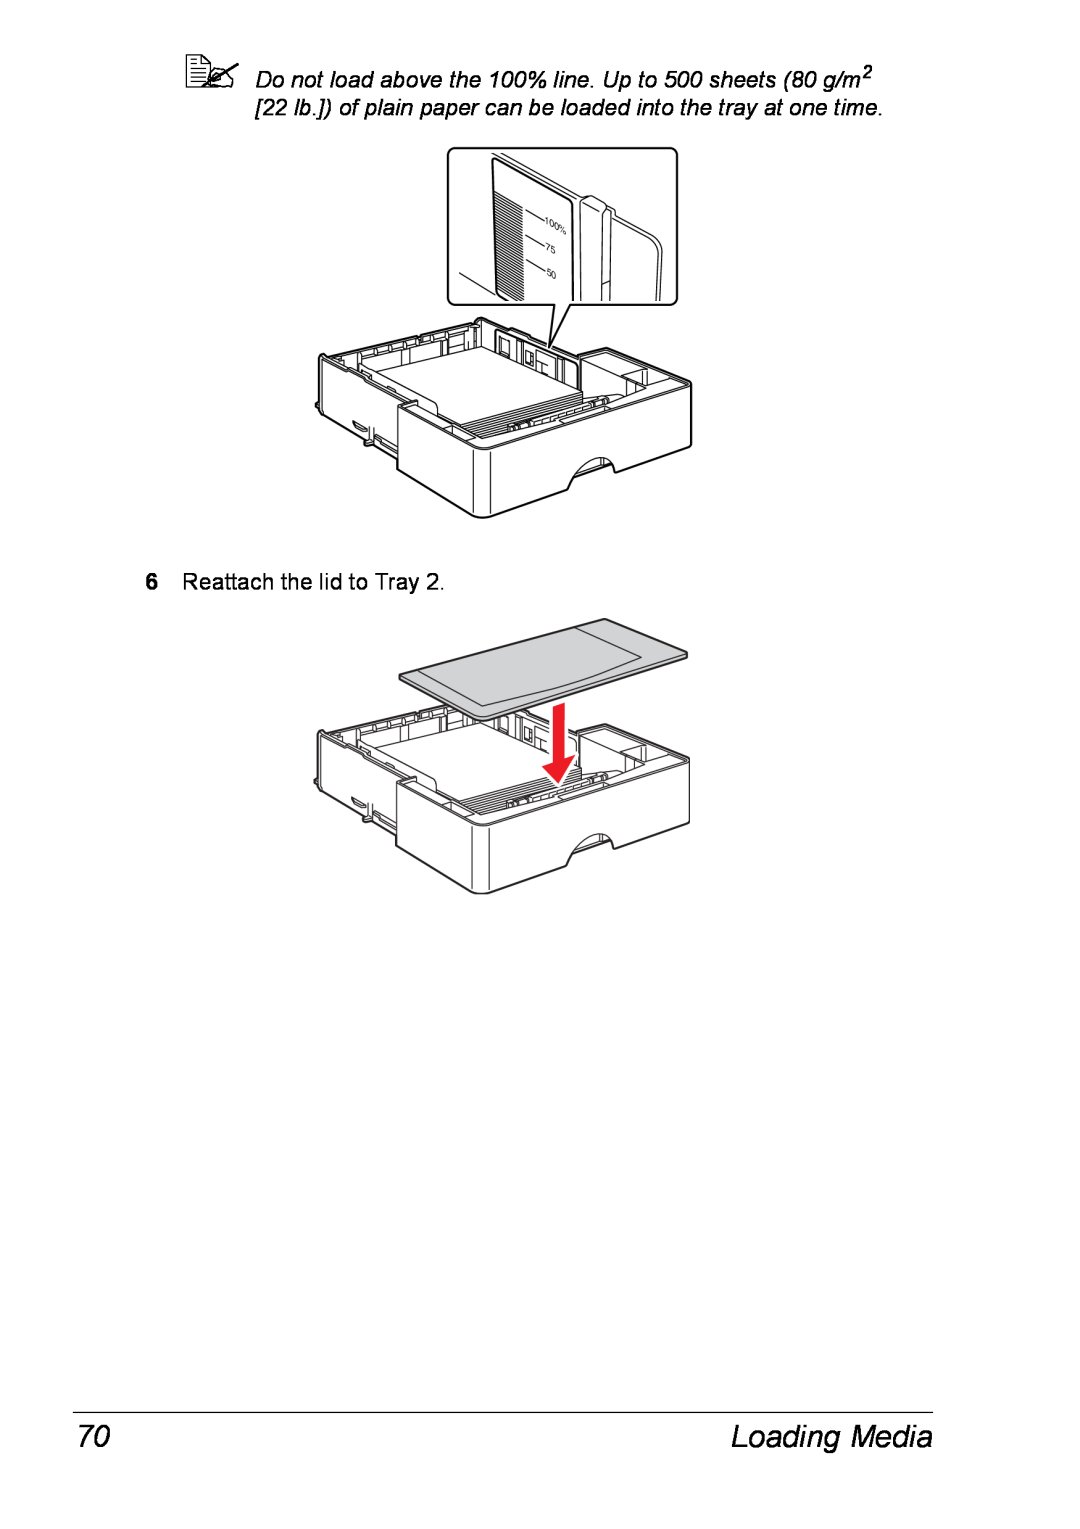 Xerox 6120 manual Loading Media, Reattach the lid to Tray, 100% 